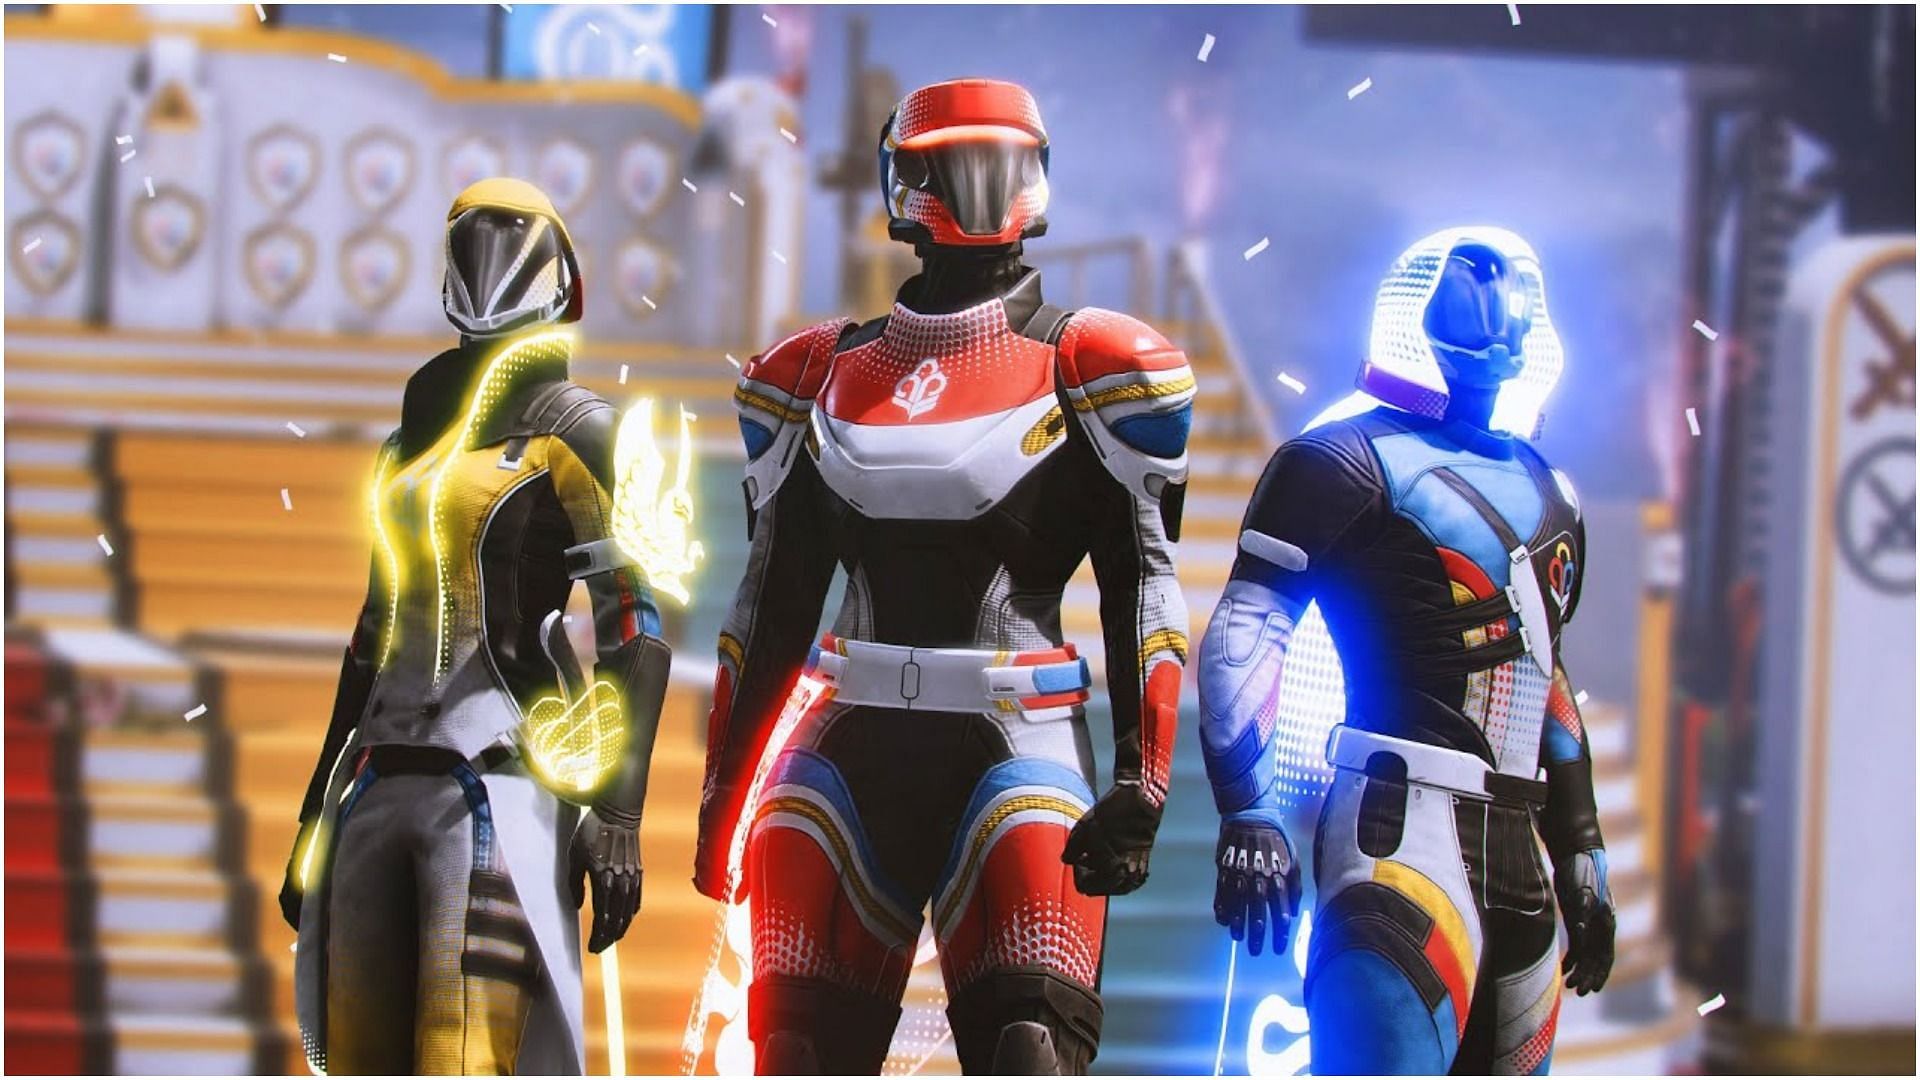 Guardian Games 2021 armor set for all classes (Image via Bungie)